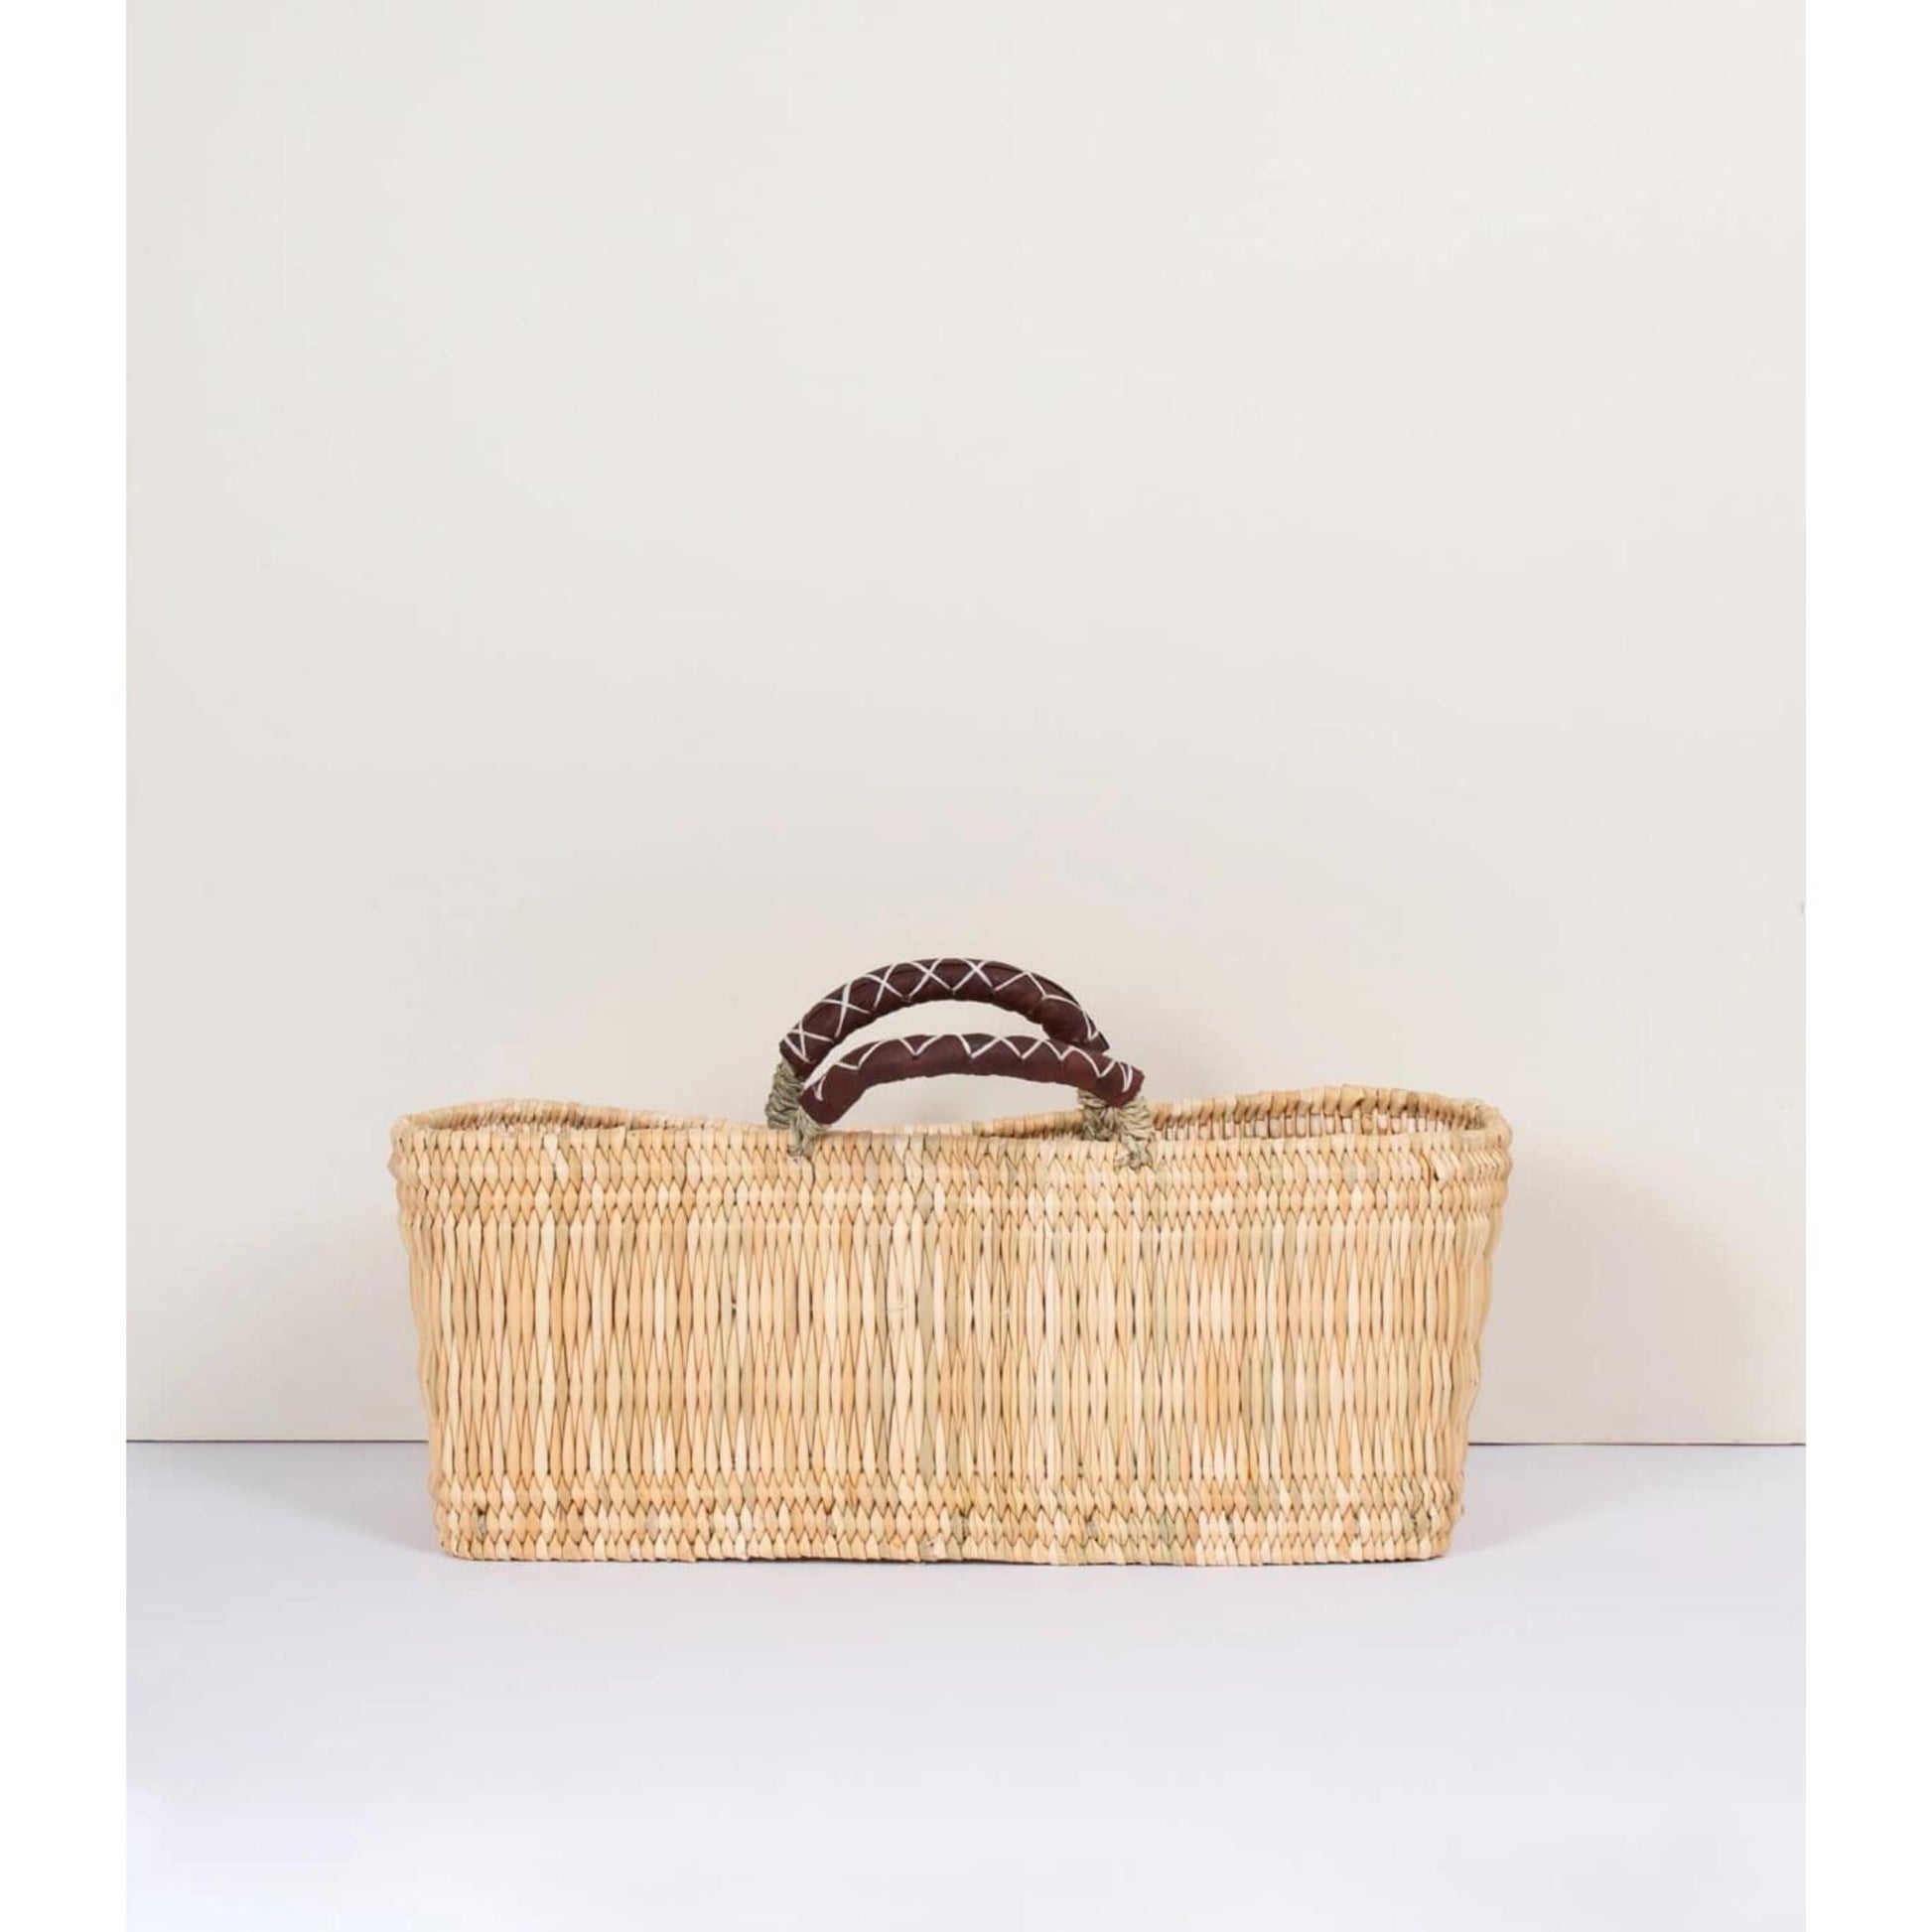 Narrow rectangular handled basket handmade in Morocco with ethically-sourced woven palm leaves and naturally tanned leather shown in large size